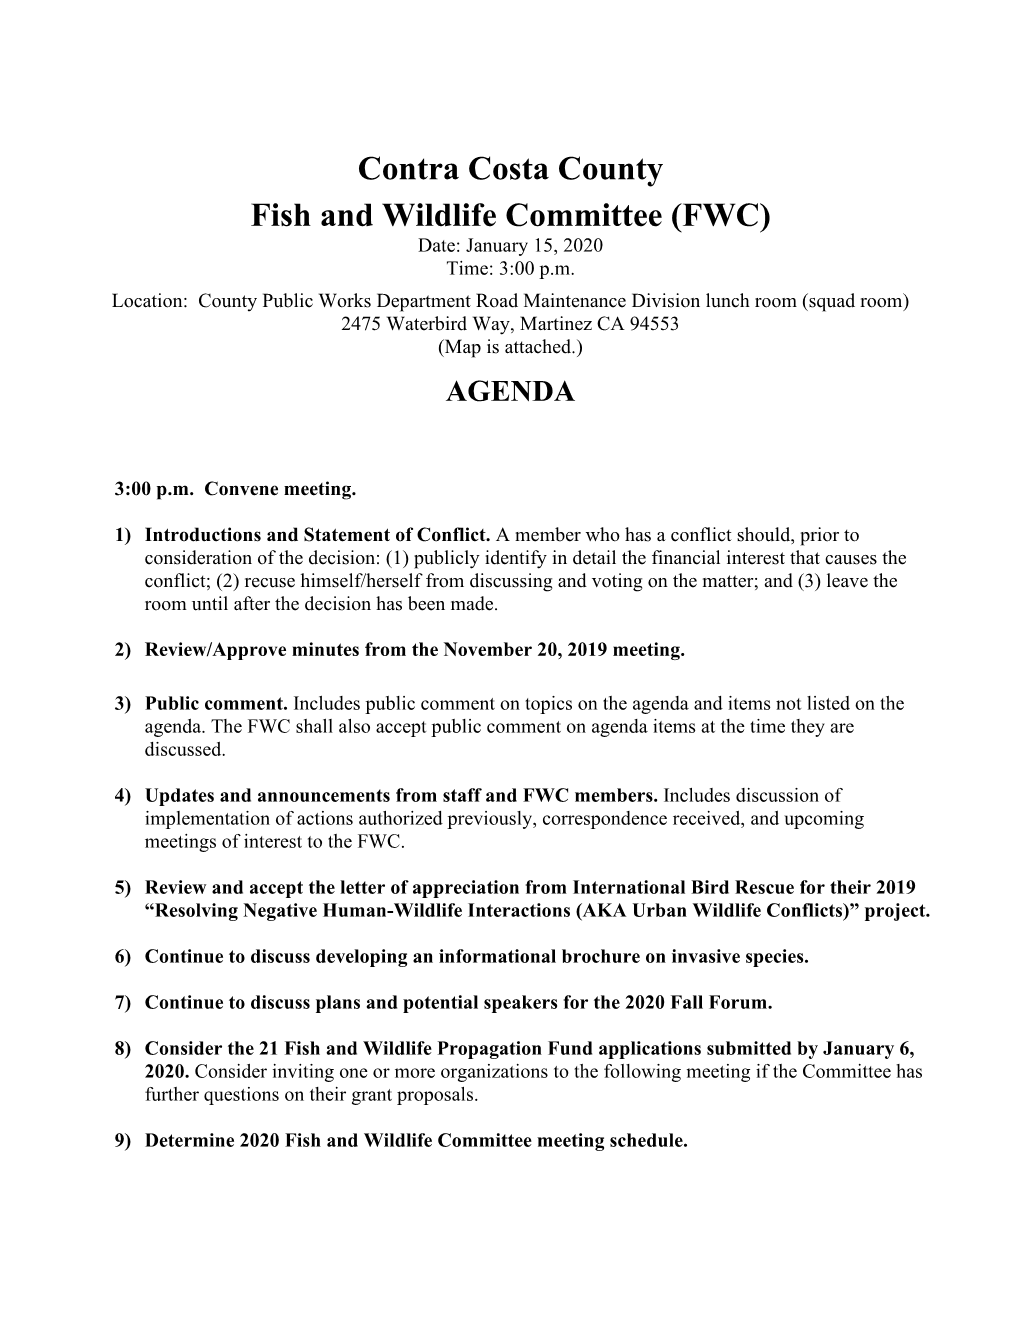 Contra Costa County Fish and Wildlife Committee (FWC) Date: January 15, 2020 Time: 3:00 P.M